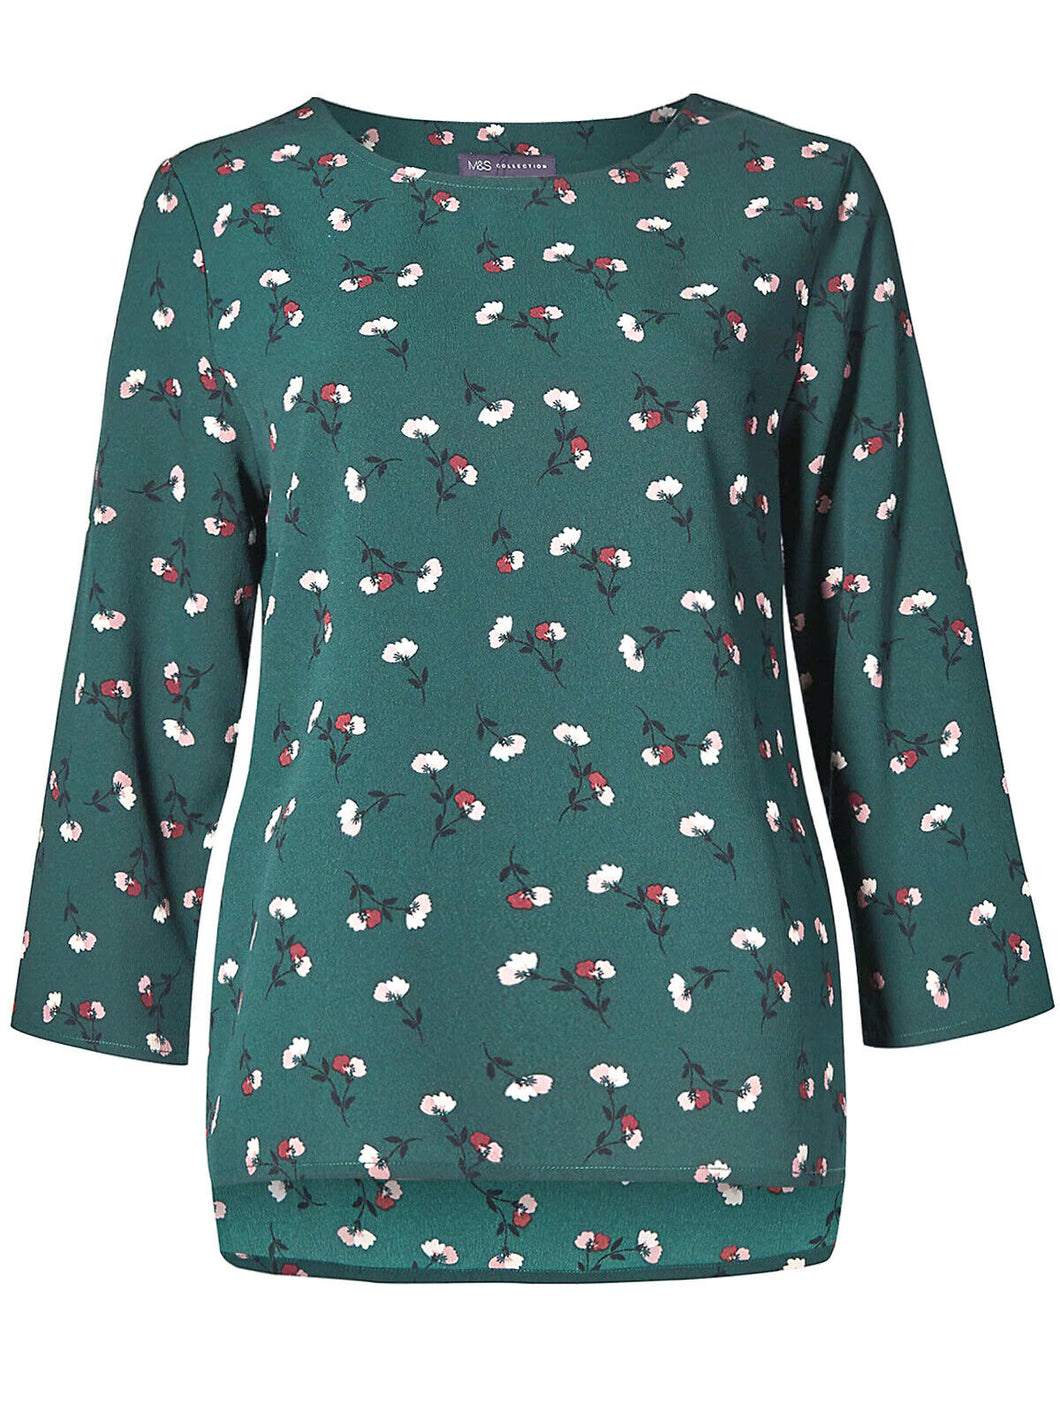 Teal Green Floral Round neck Swing Top